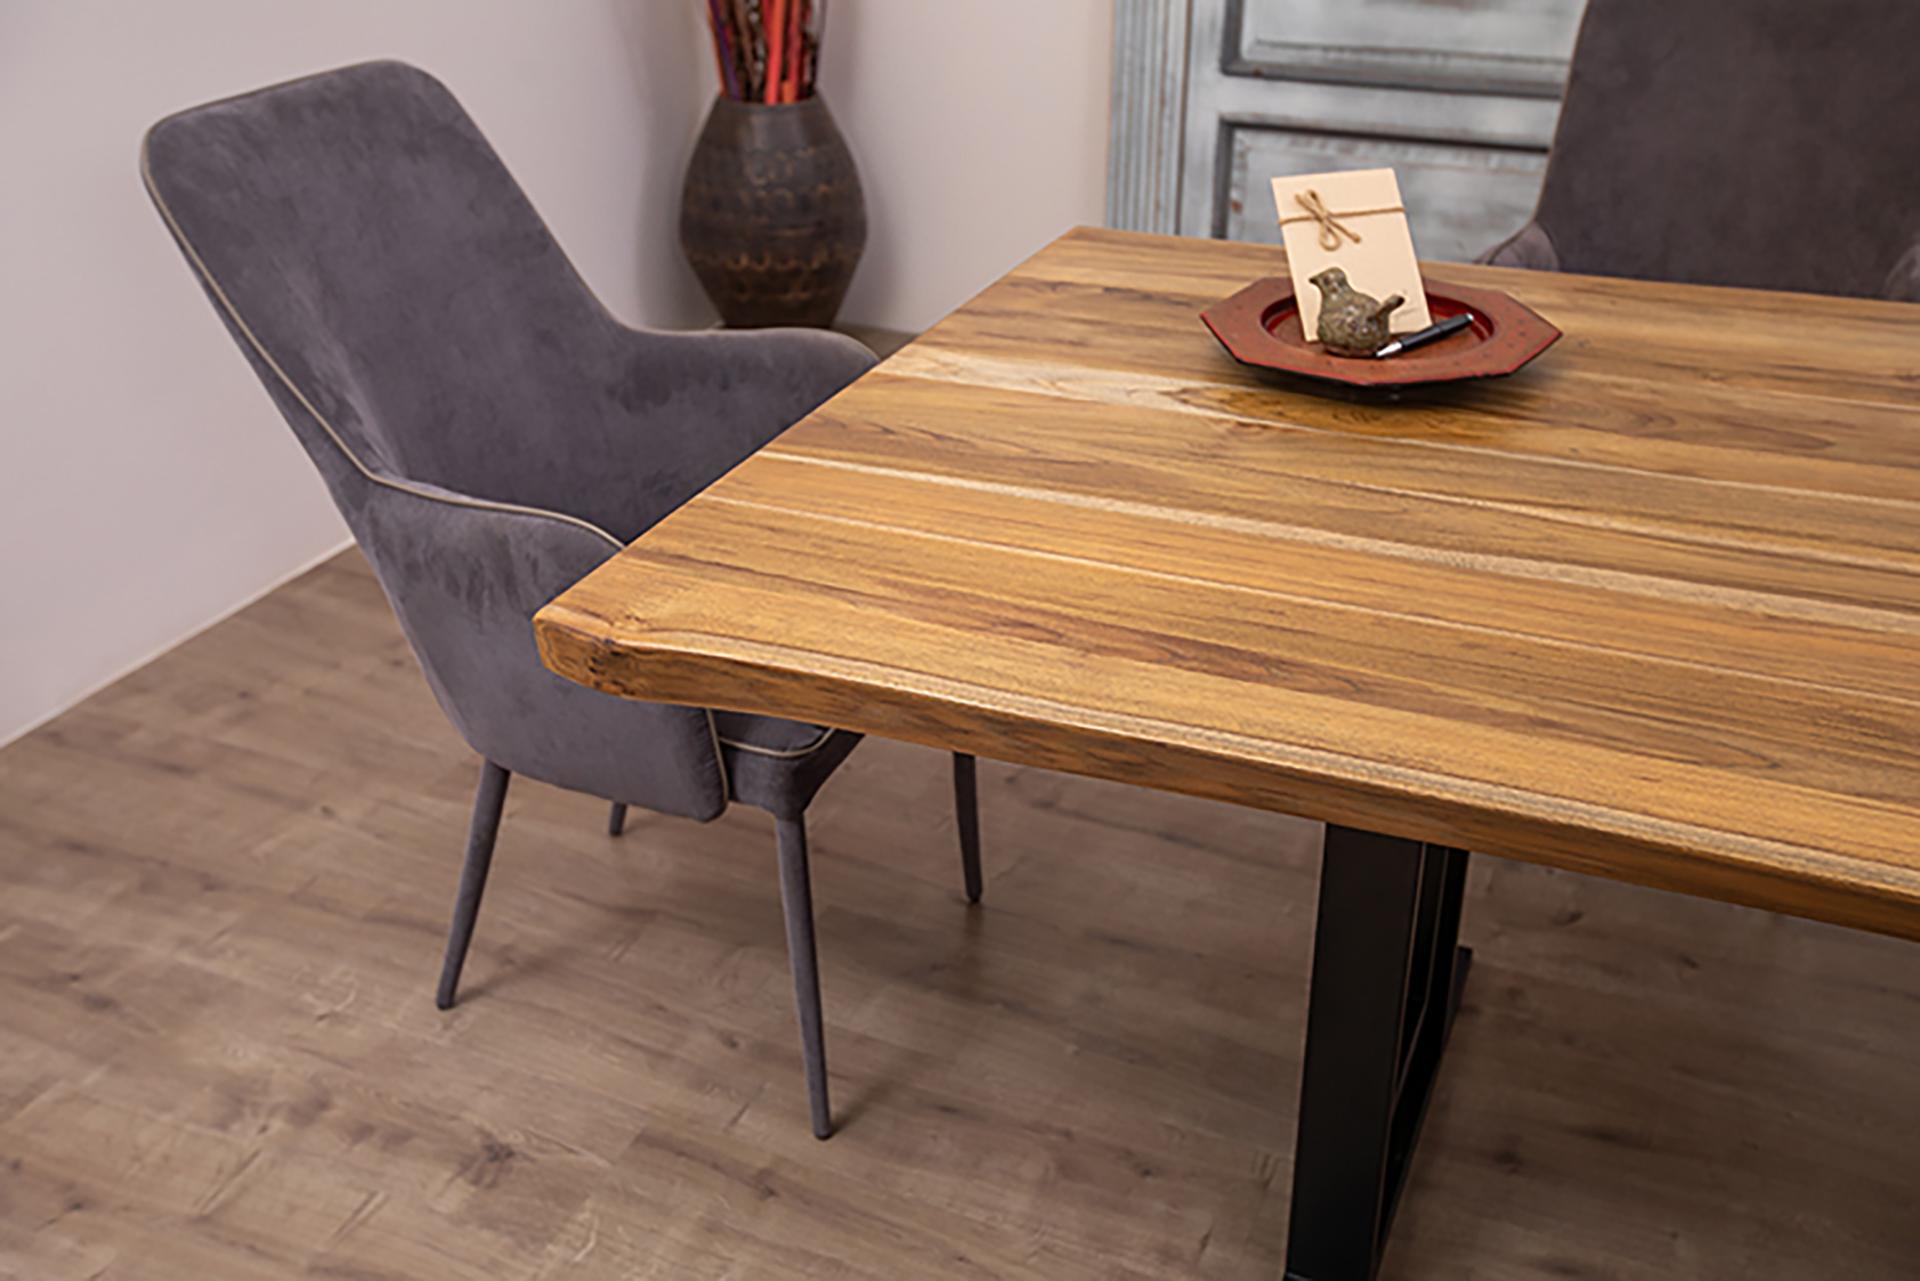 100% Solid Teak Live Edge Dining Table in Autumn, Color Chip Sample Available In New Condition For Sale In Boulder, CO